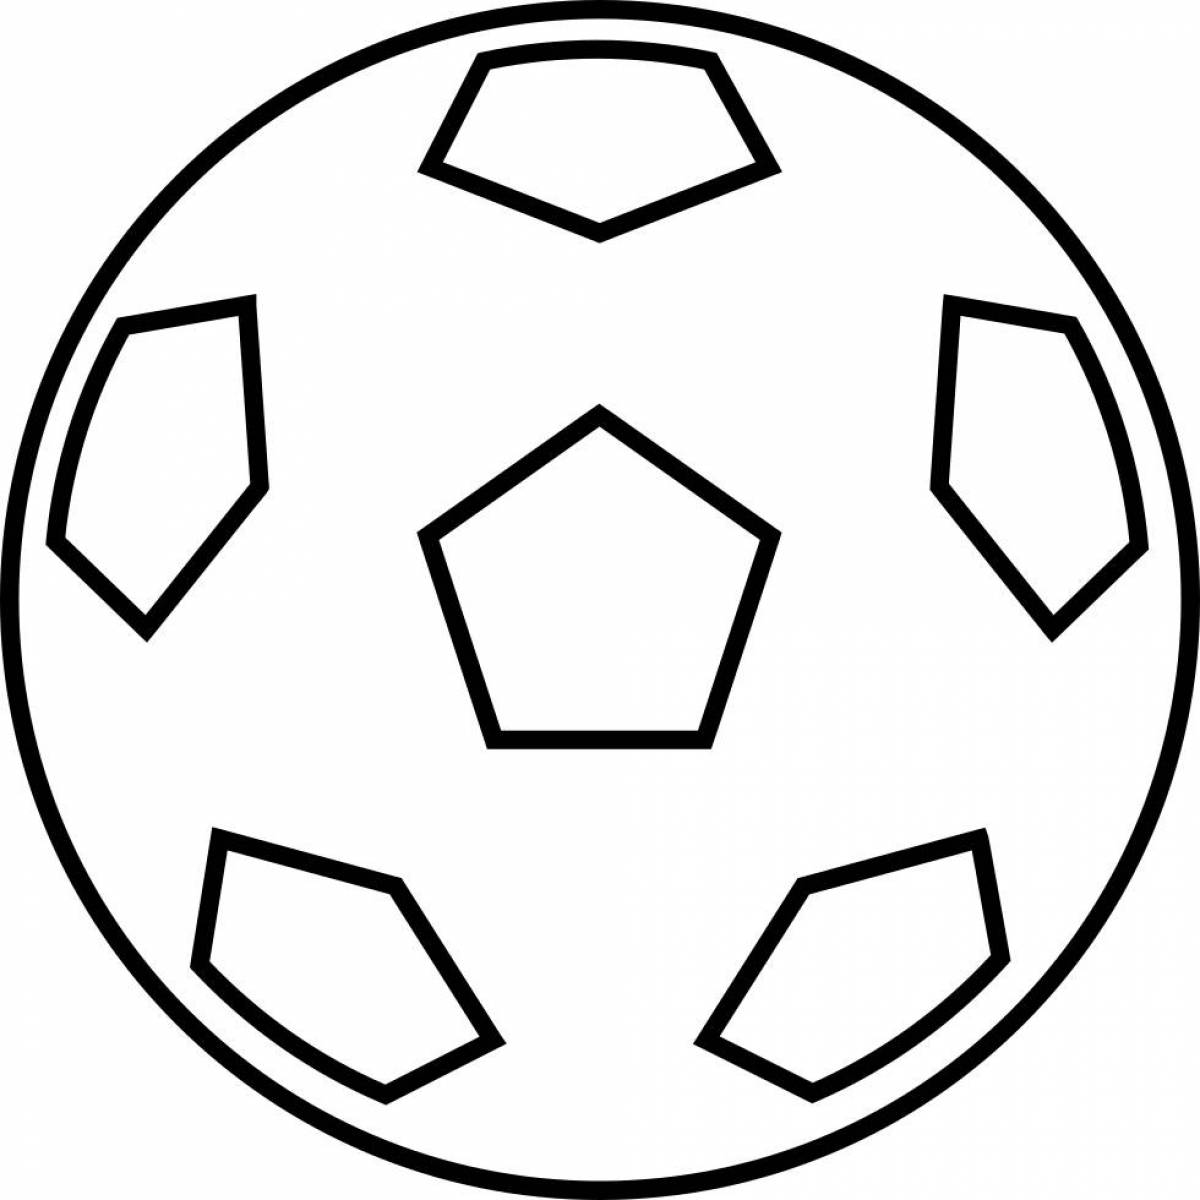 Coloring page funny soccer ball